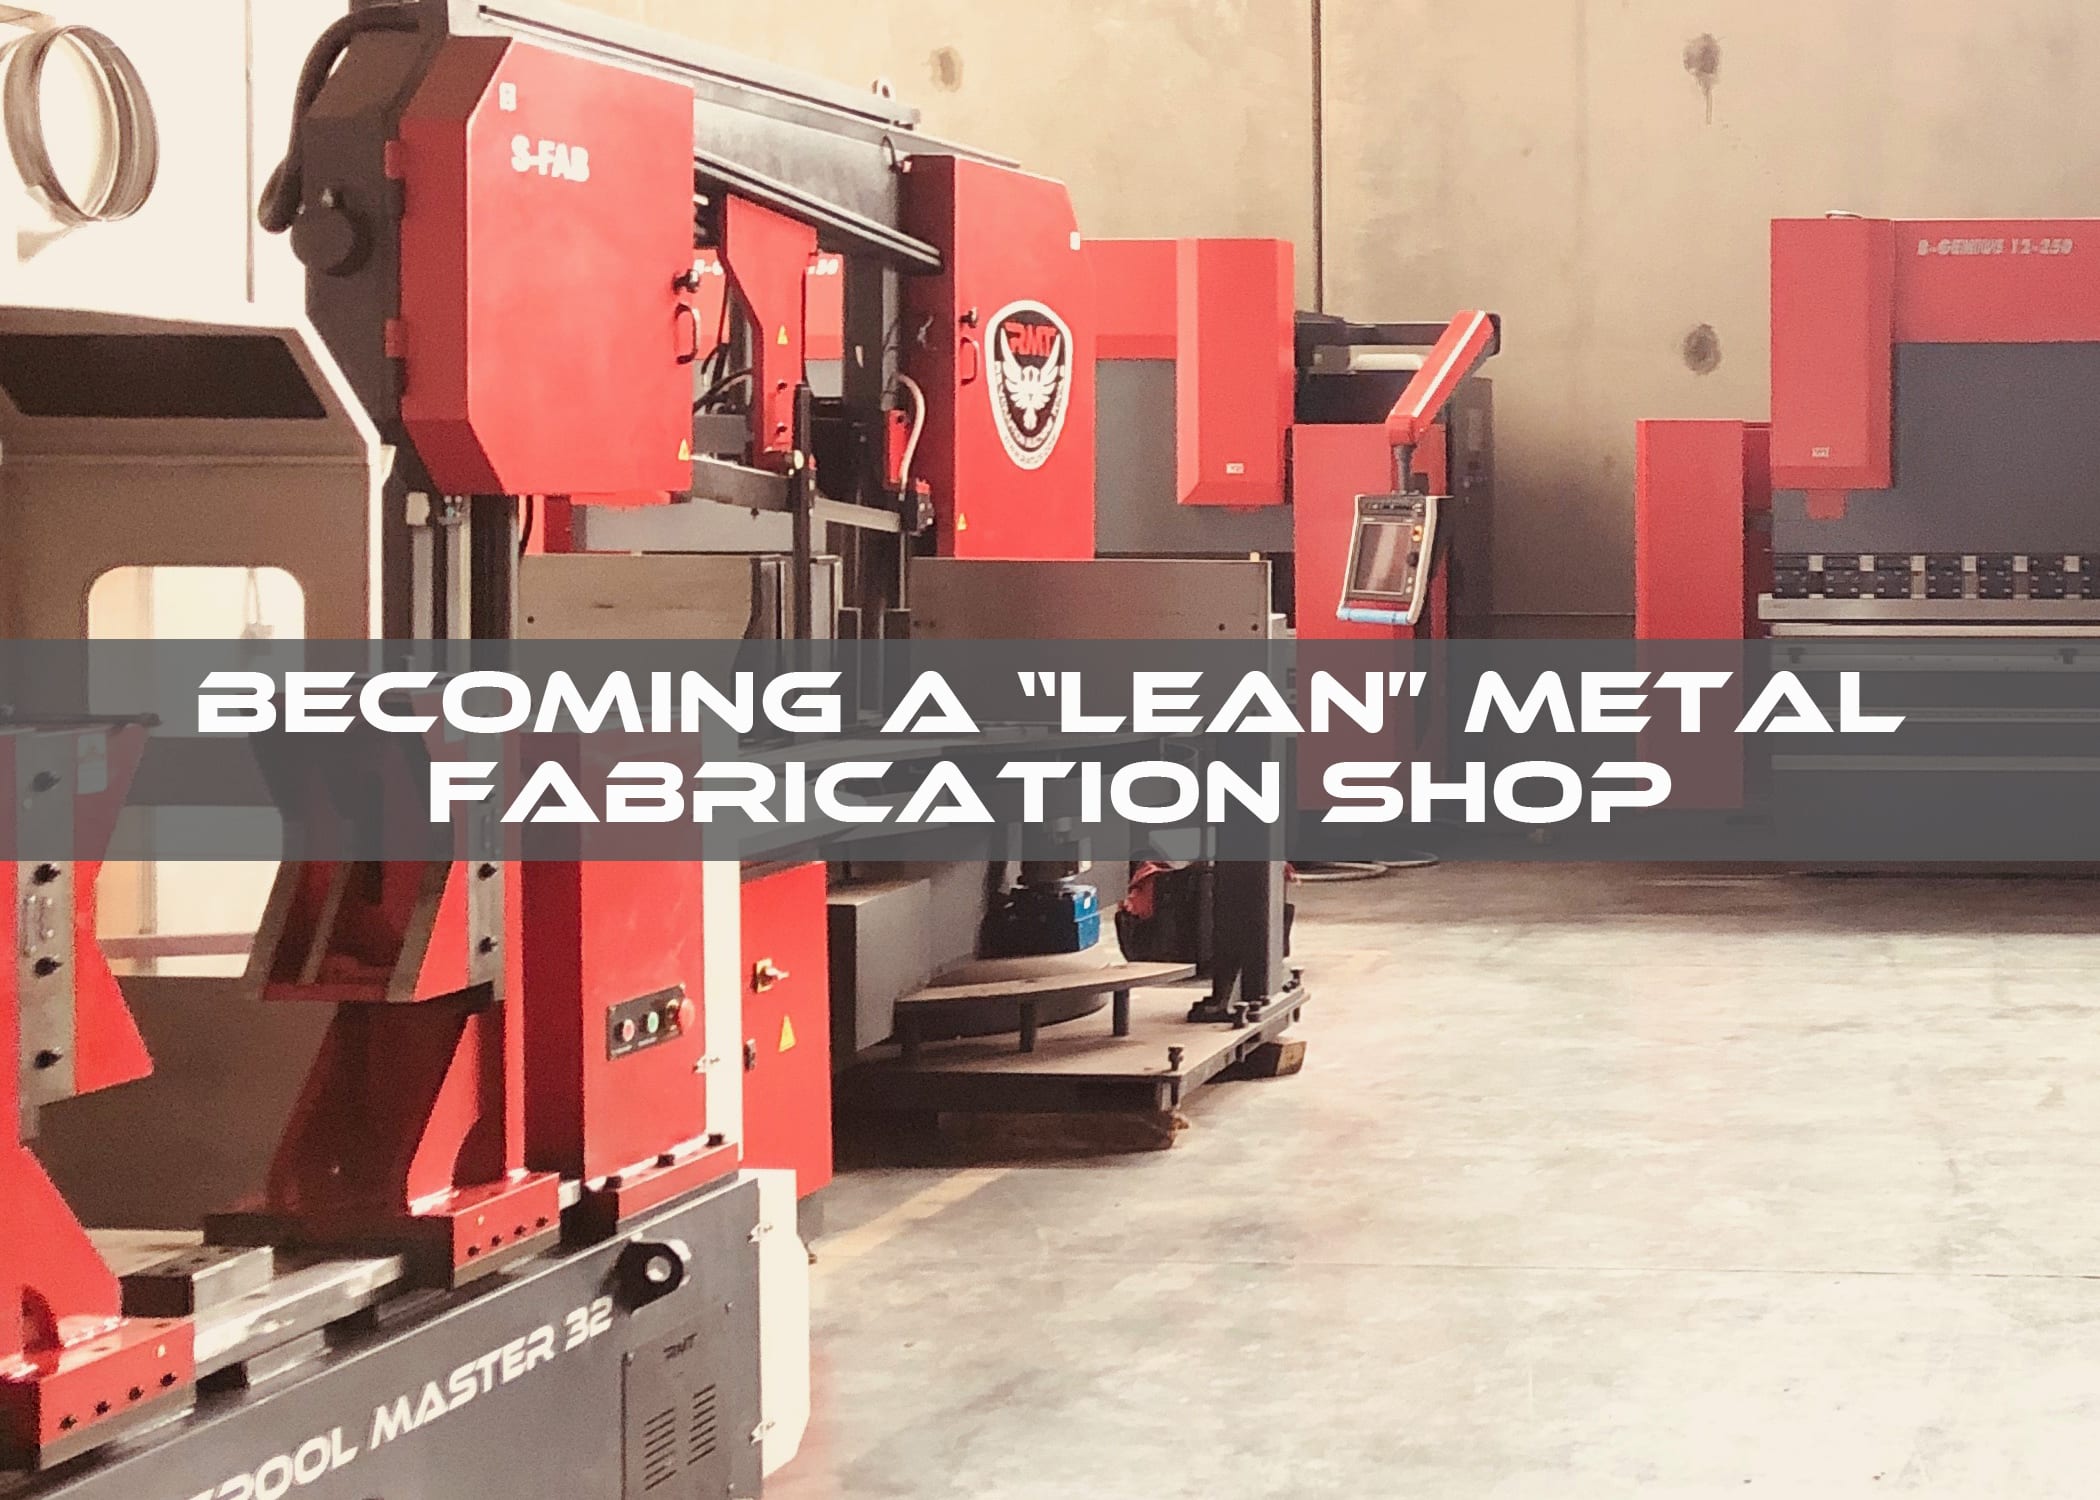 Becoming a Lean Metal Fabrication Shop